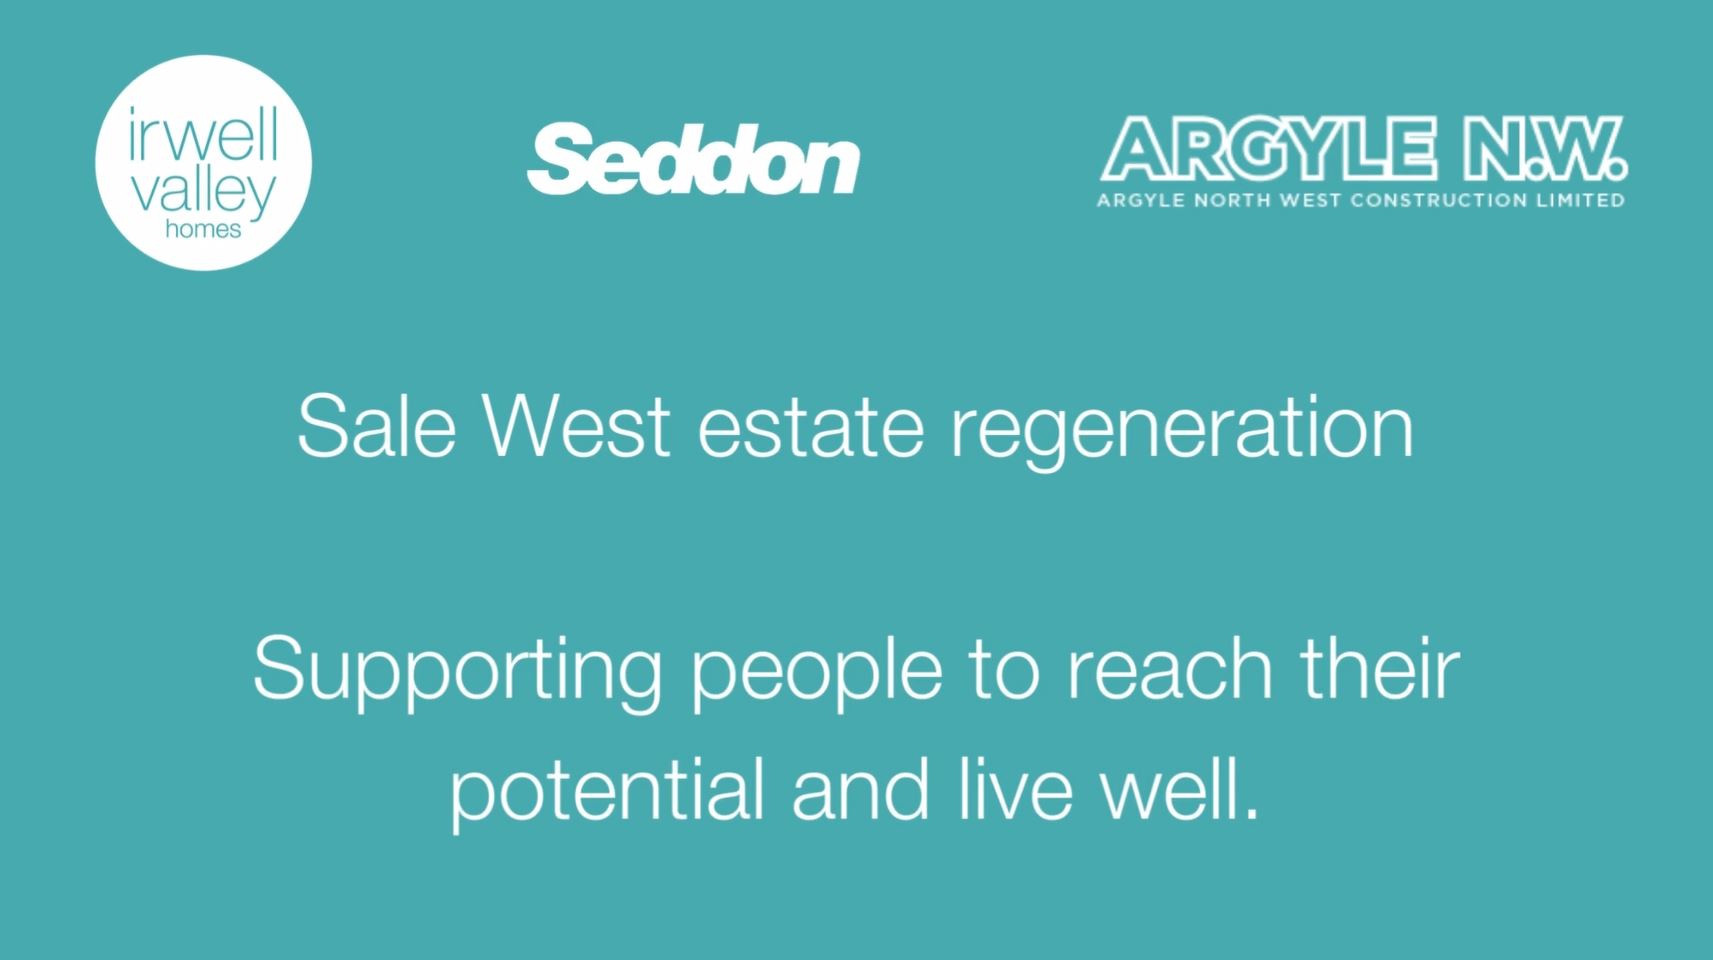 Sale West estate regeneration - supporting people to reach their potential and live well